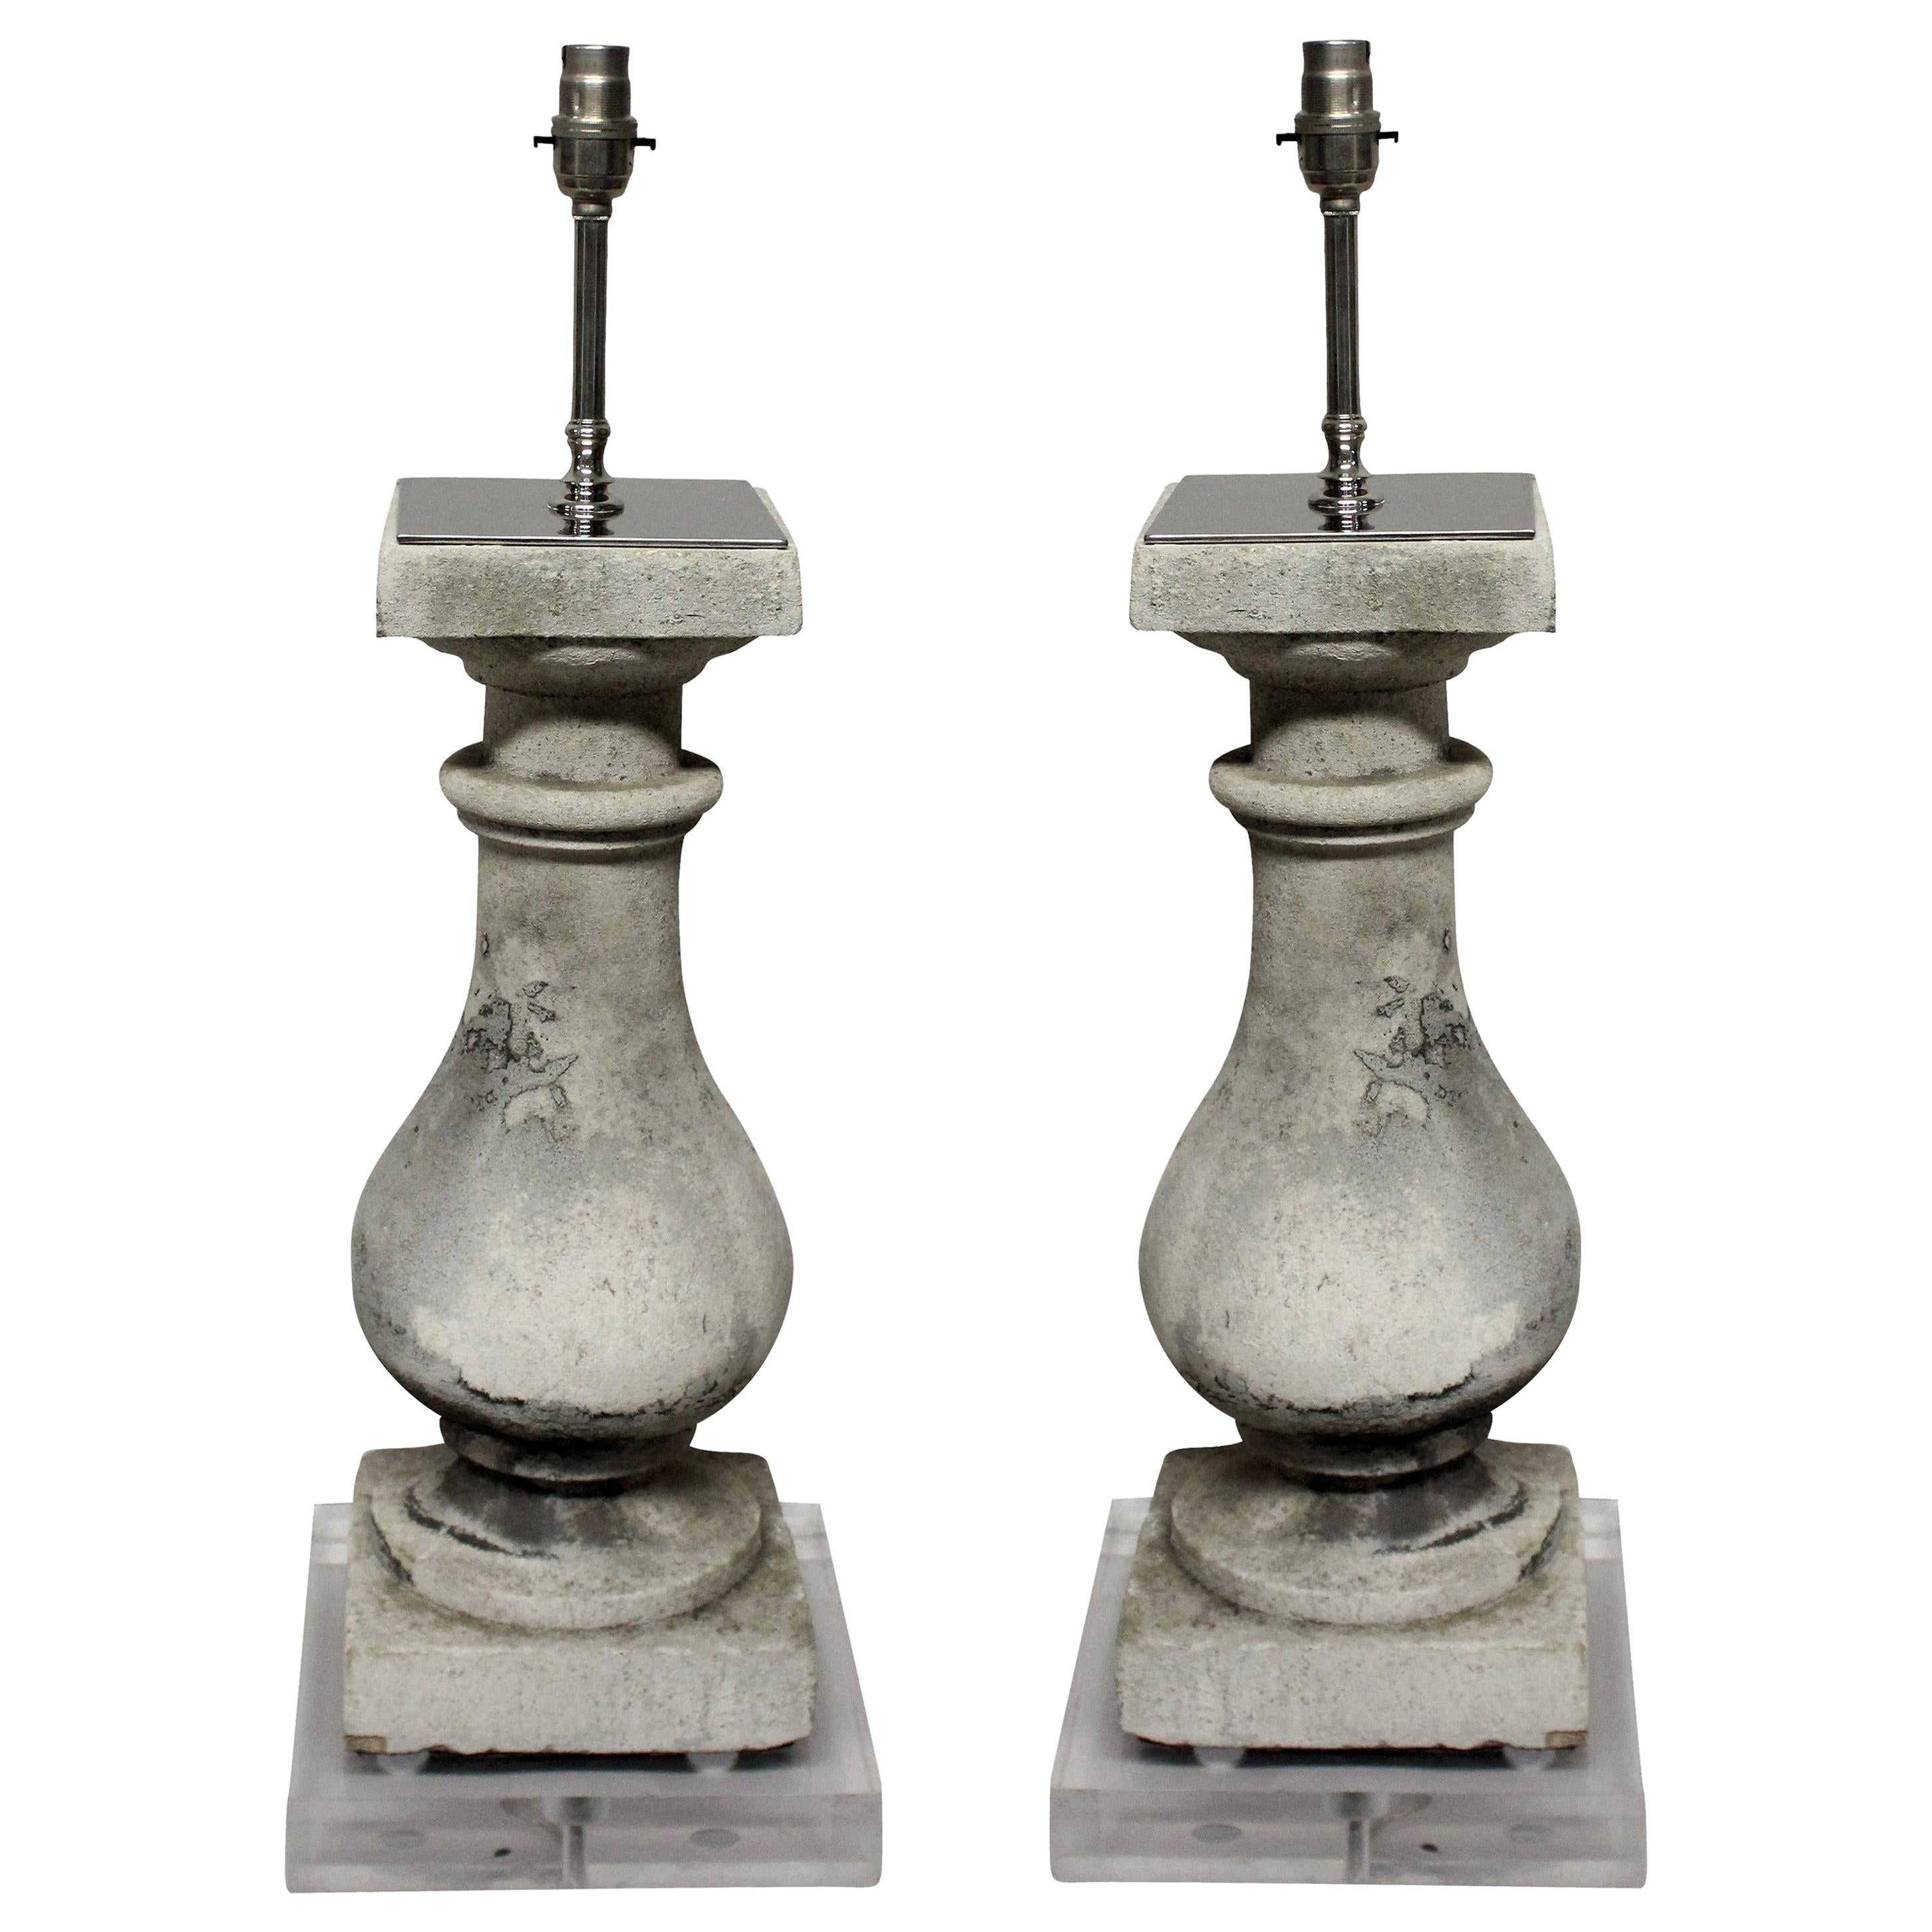 Pair of Stone Balustrade Lamps on Perspex Bases